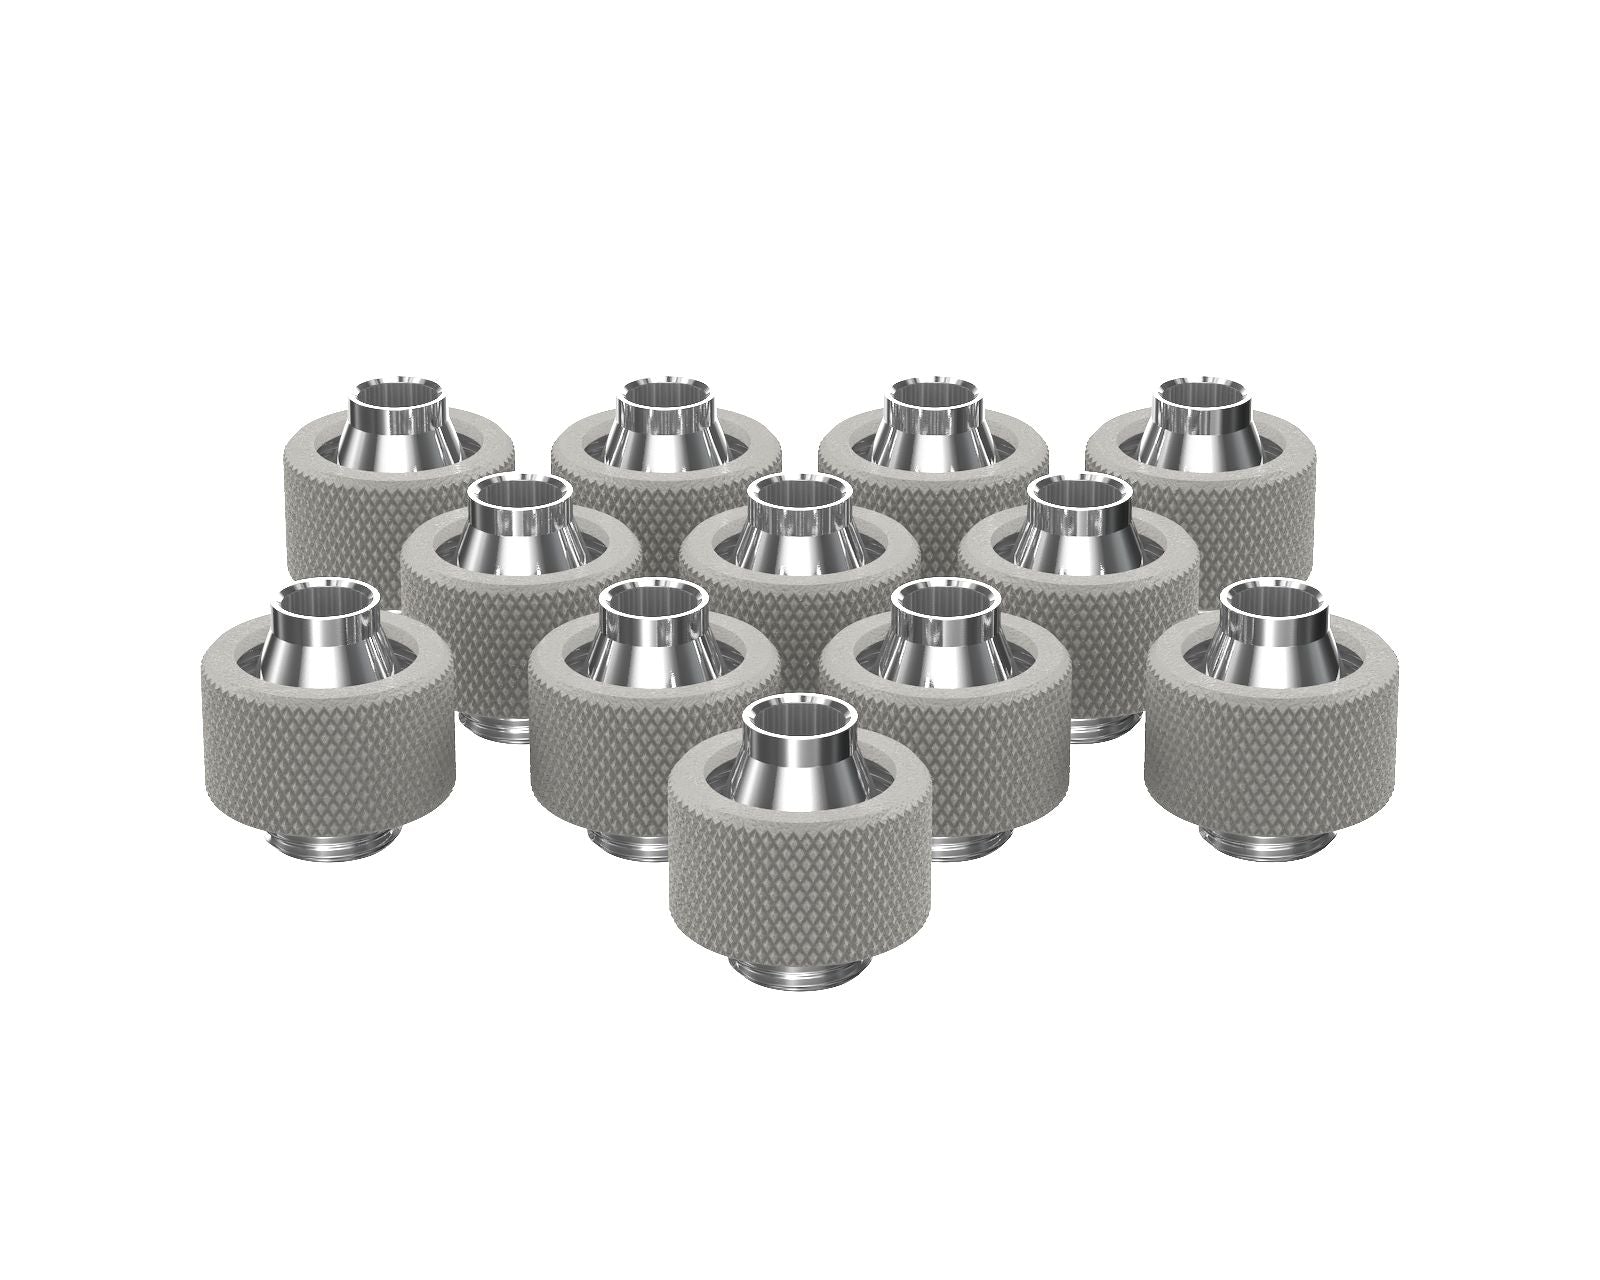 PrimoChill SecureFit SX - Premium Compression Fitting For 3/8in ID x 5/8in OD Flexible Tubing 12 Pack (F-SFSX58-12) - Available in 20+ Colors, Custom Watercooling Loop Ready - TX Matte Silver